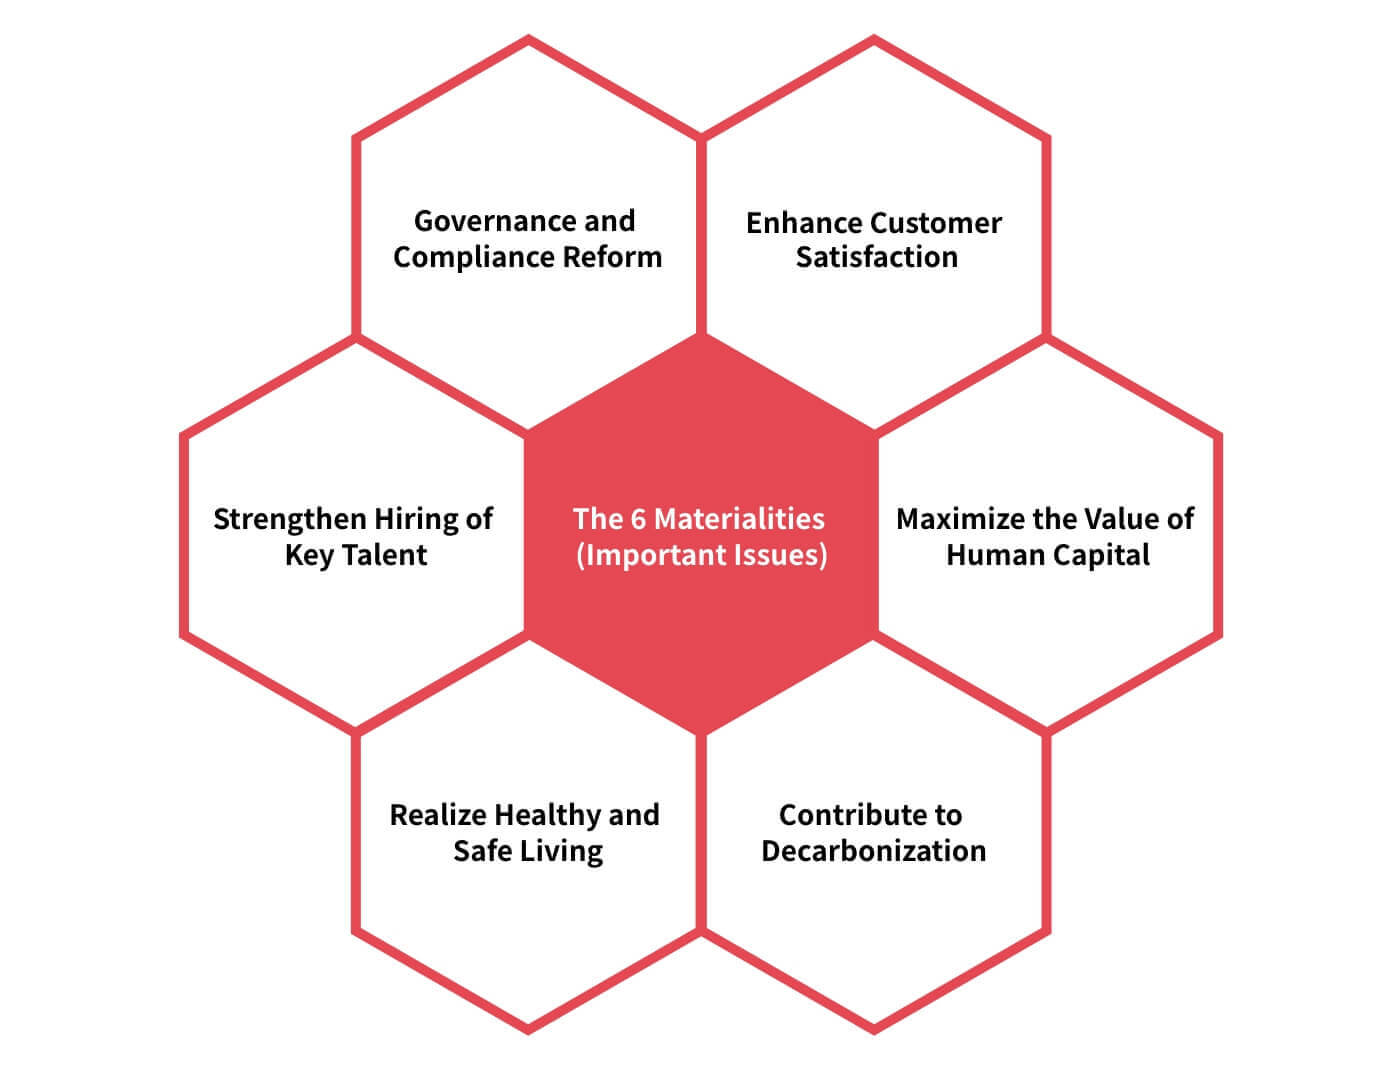 The 6 Materialities (Important Issues)